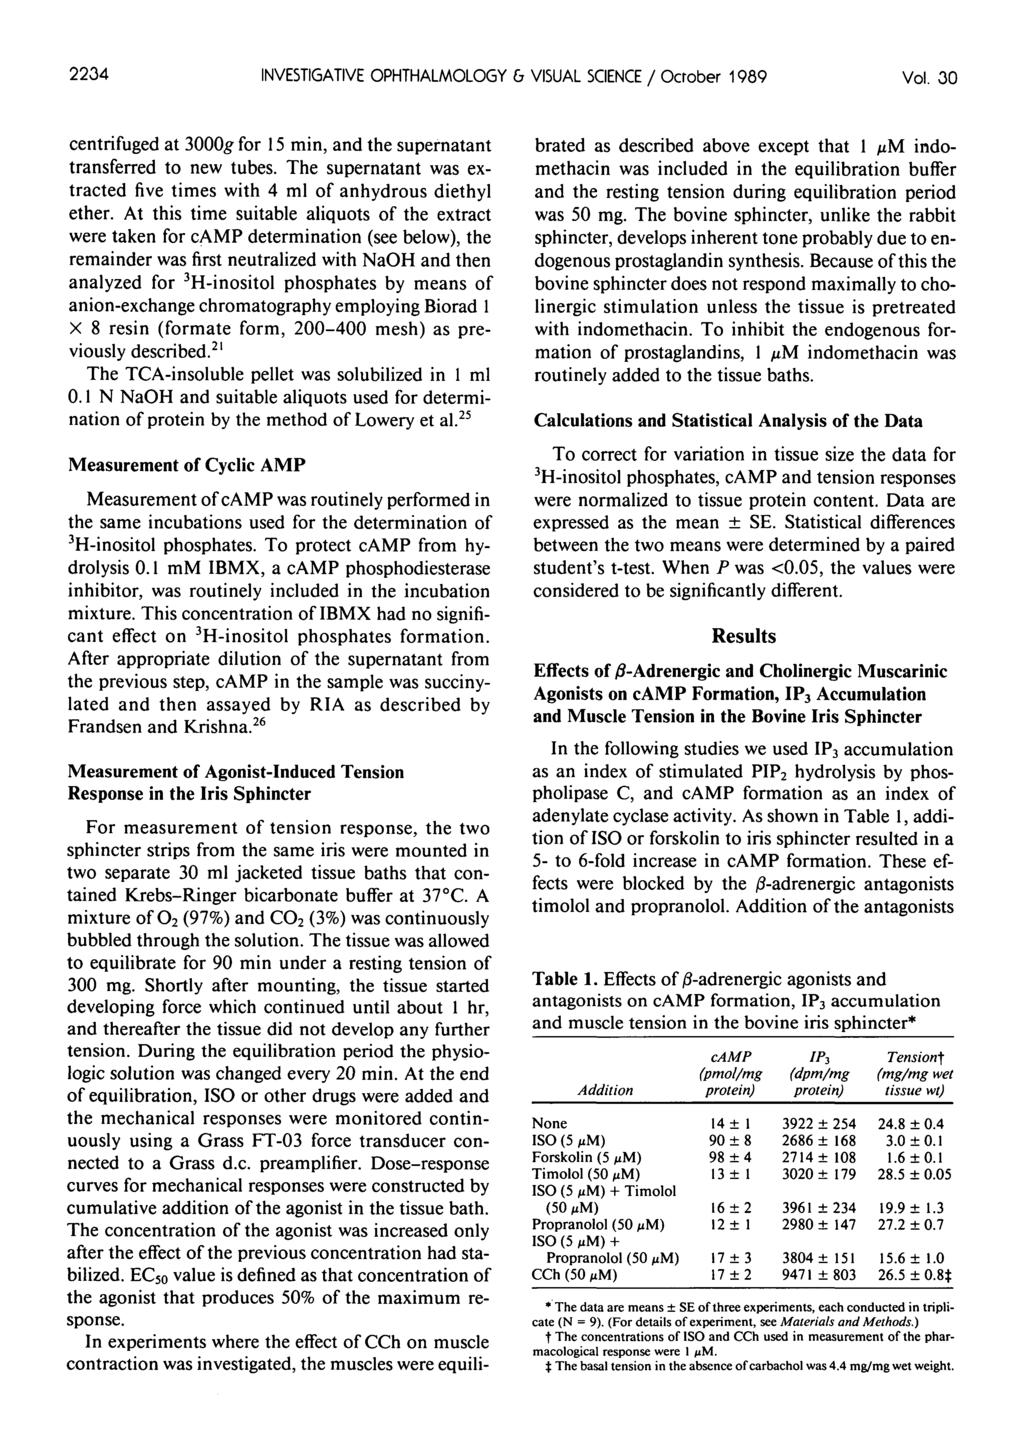 2234 INVESTIGATIVE OPHTHALMOLOGY & VISUAL SCIENCE / October 1989 Vol. 30 centrifuged at 3000g for 15 min, and the supernatant transferred to new tubes.